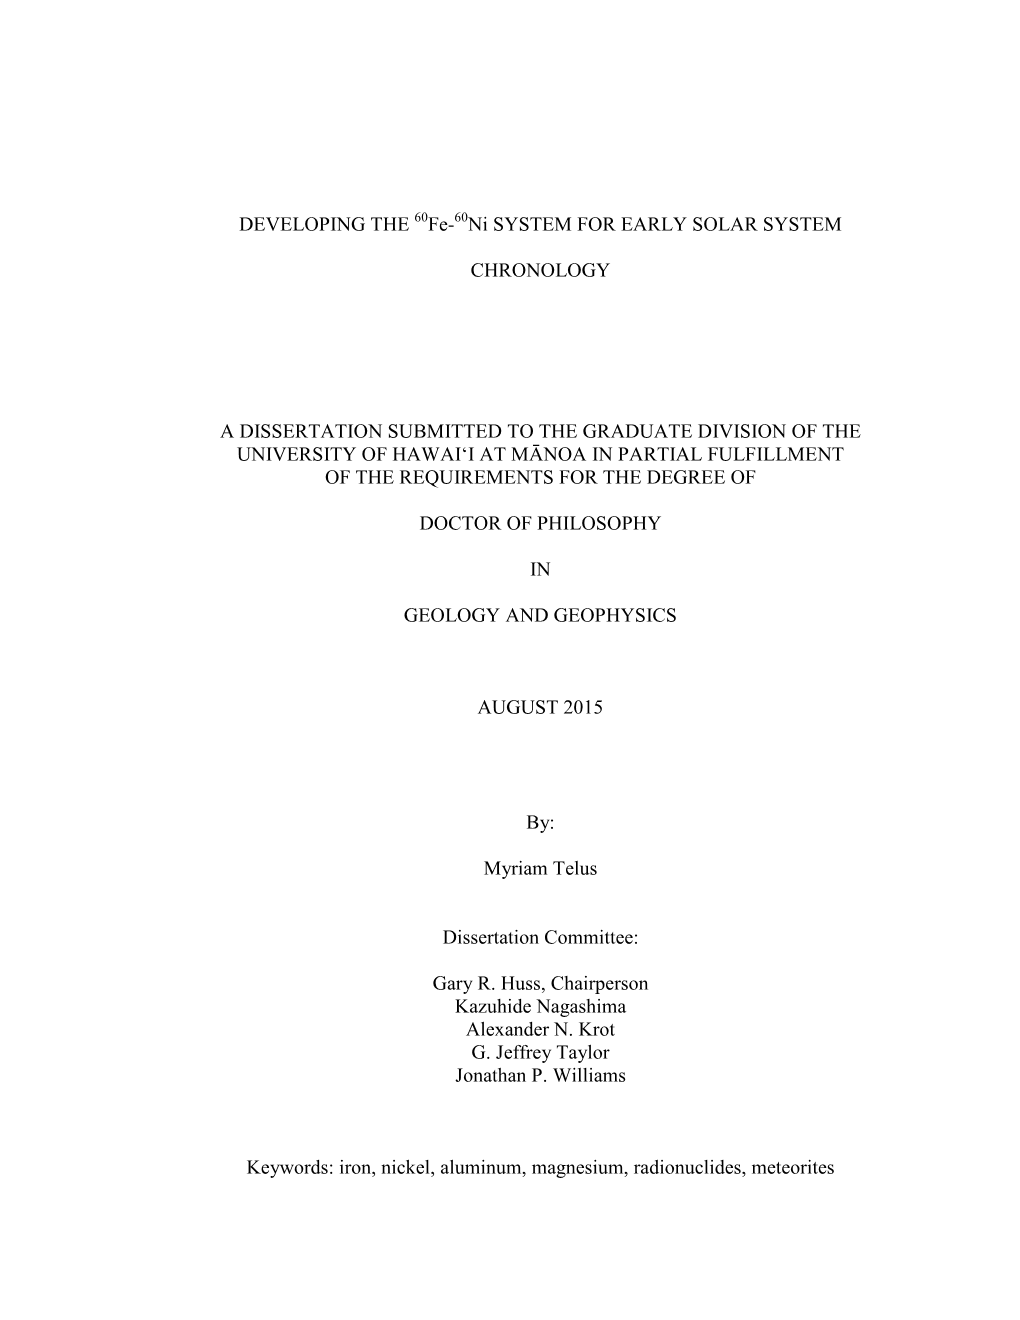 Dissertation Submitted to the Graduate Division of the University of Hawai‘I at Mānoa in Partial Fulfillment of the Requirements for the Degree Of